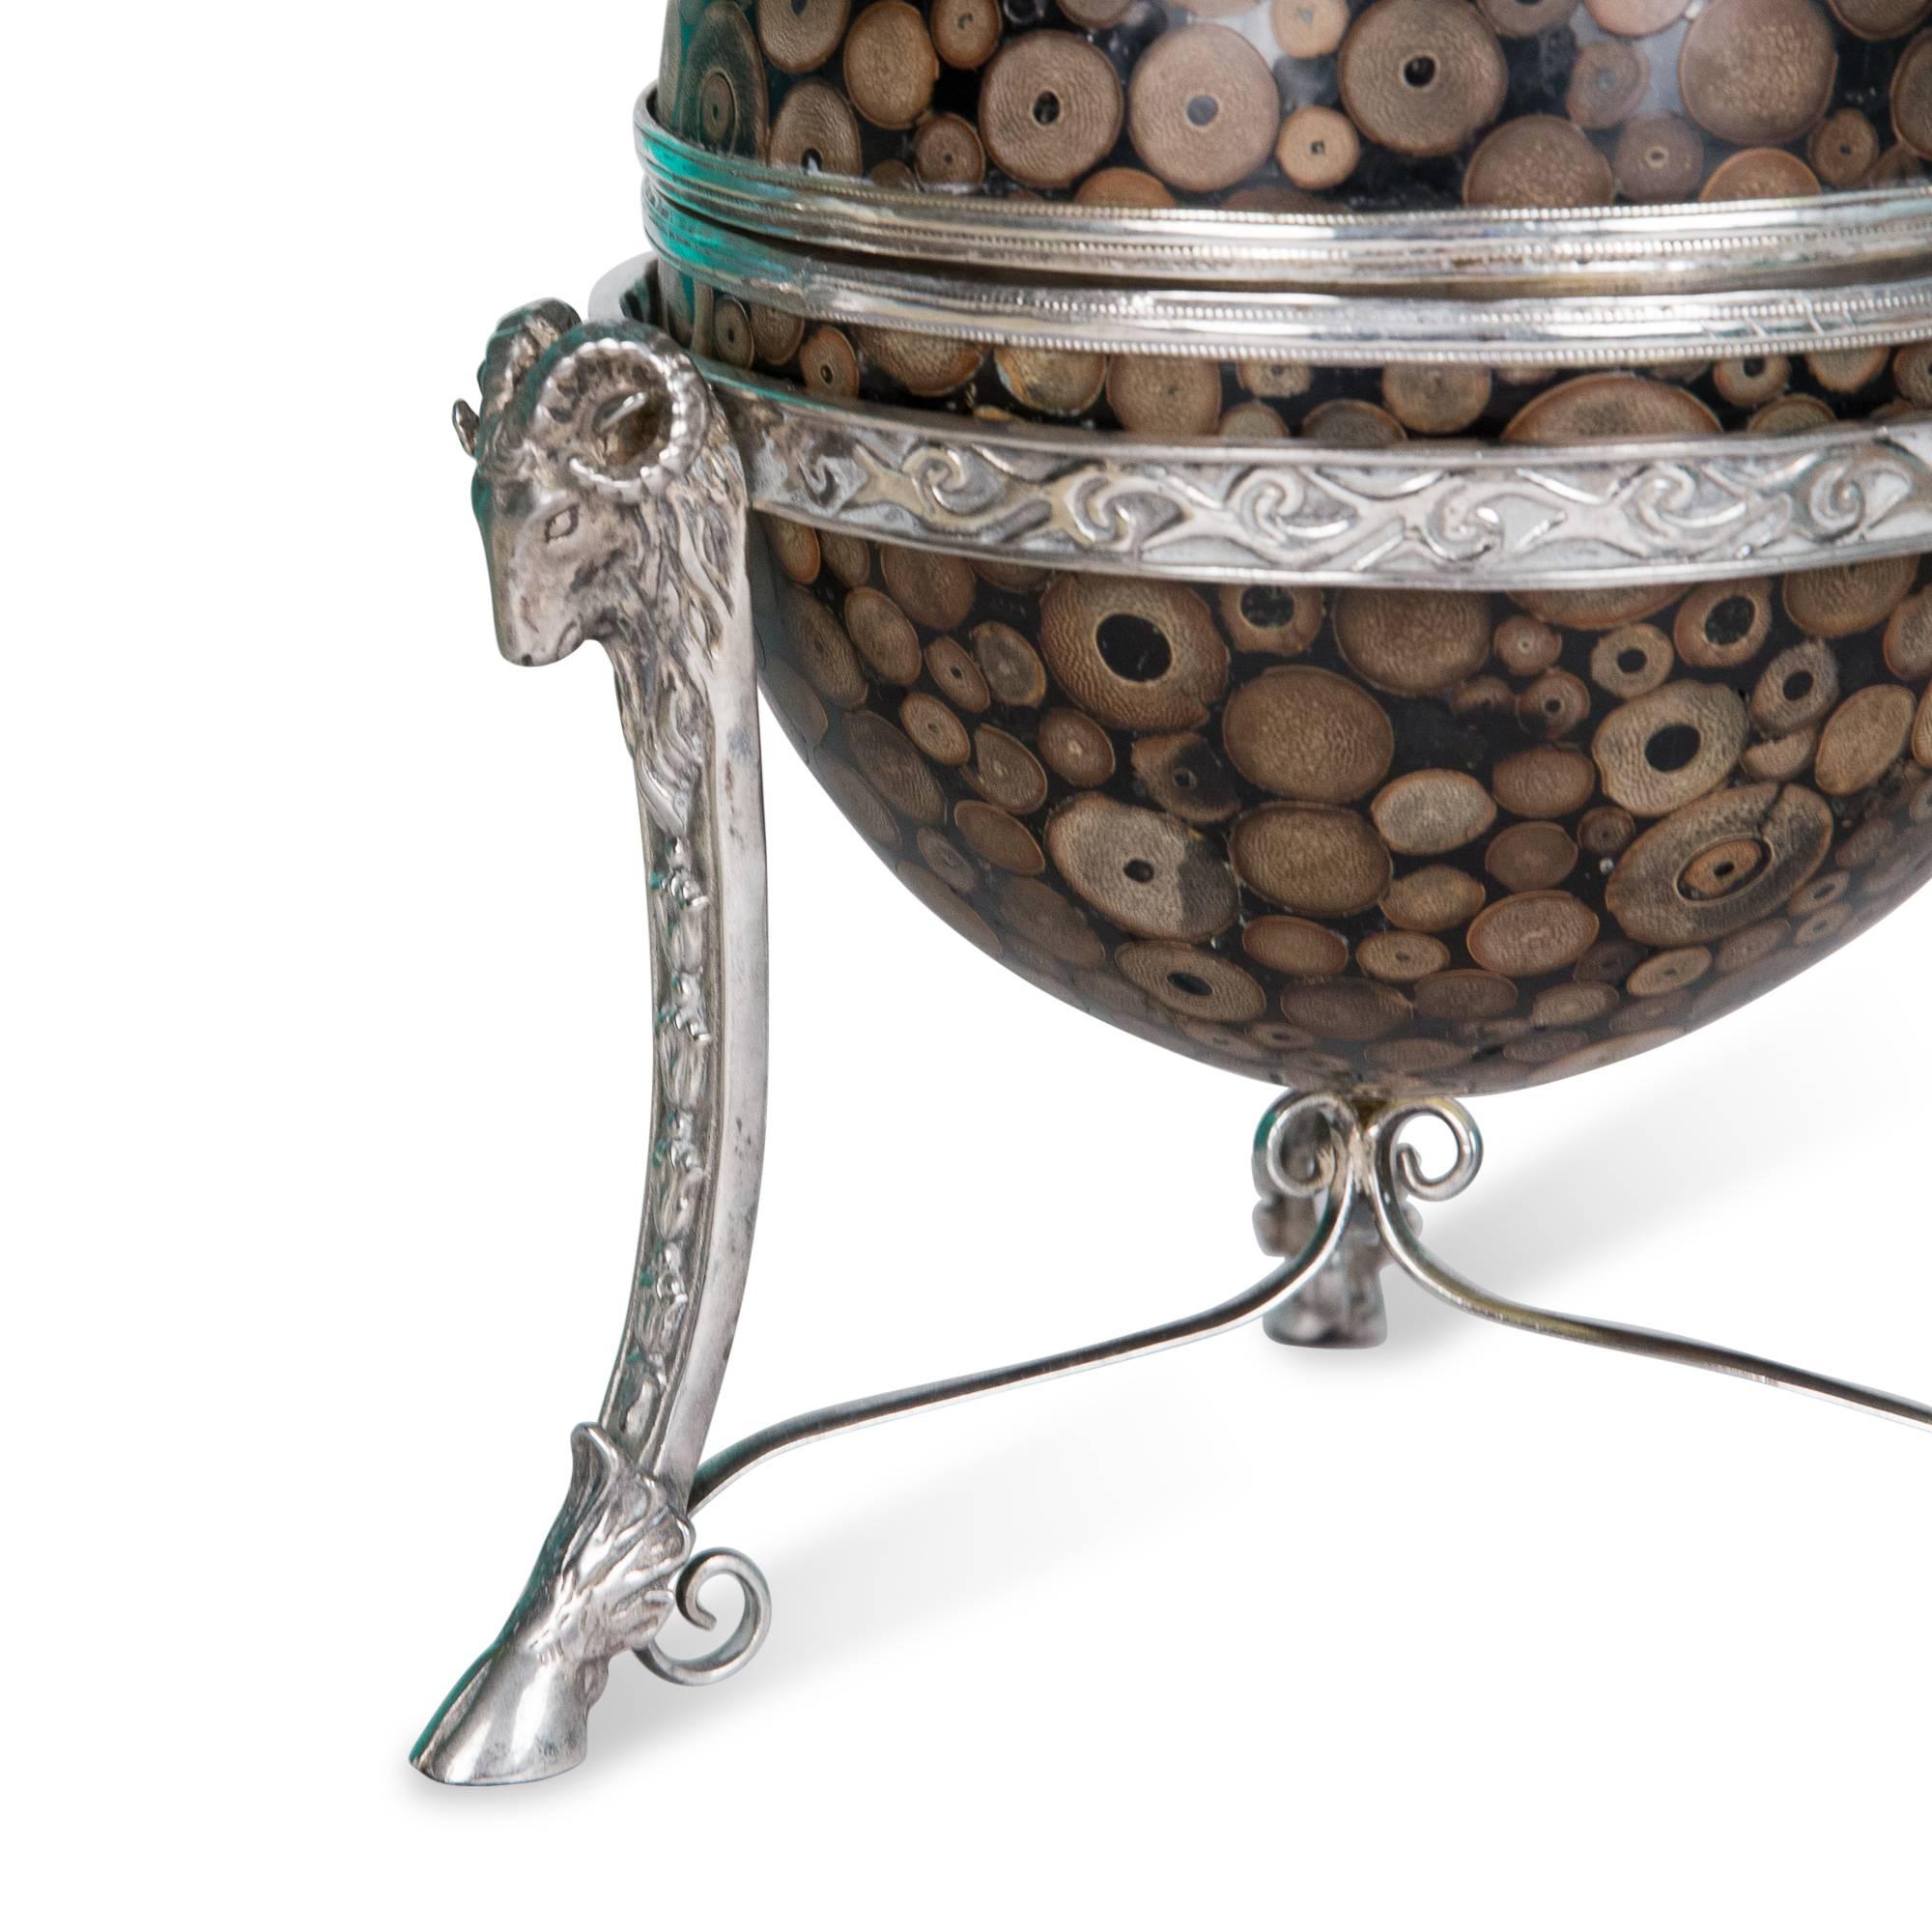 Egg form box, with inlaid exotic wood slices, silver plated detail, on silver plate Stand decorated with rams' head and hooves, velvet lined. By Maitland-Smith, United Kingdom, 1970s. Measures: Height 10 1/2 in, diameter 8 in.
   